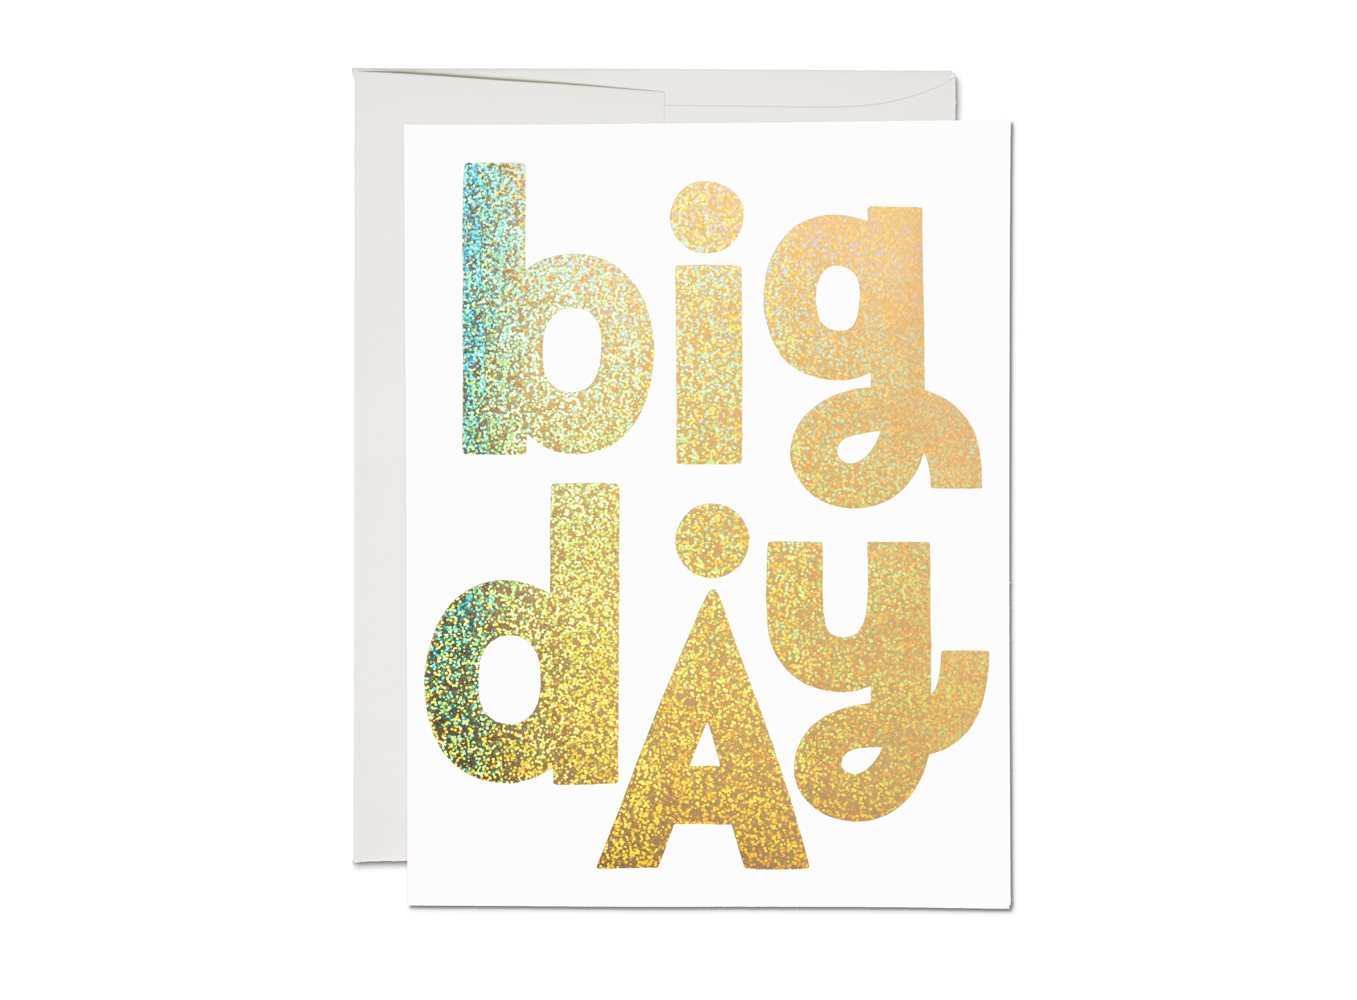 "Big Day" Foiled Greeting Card